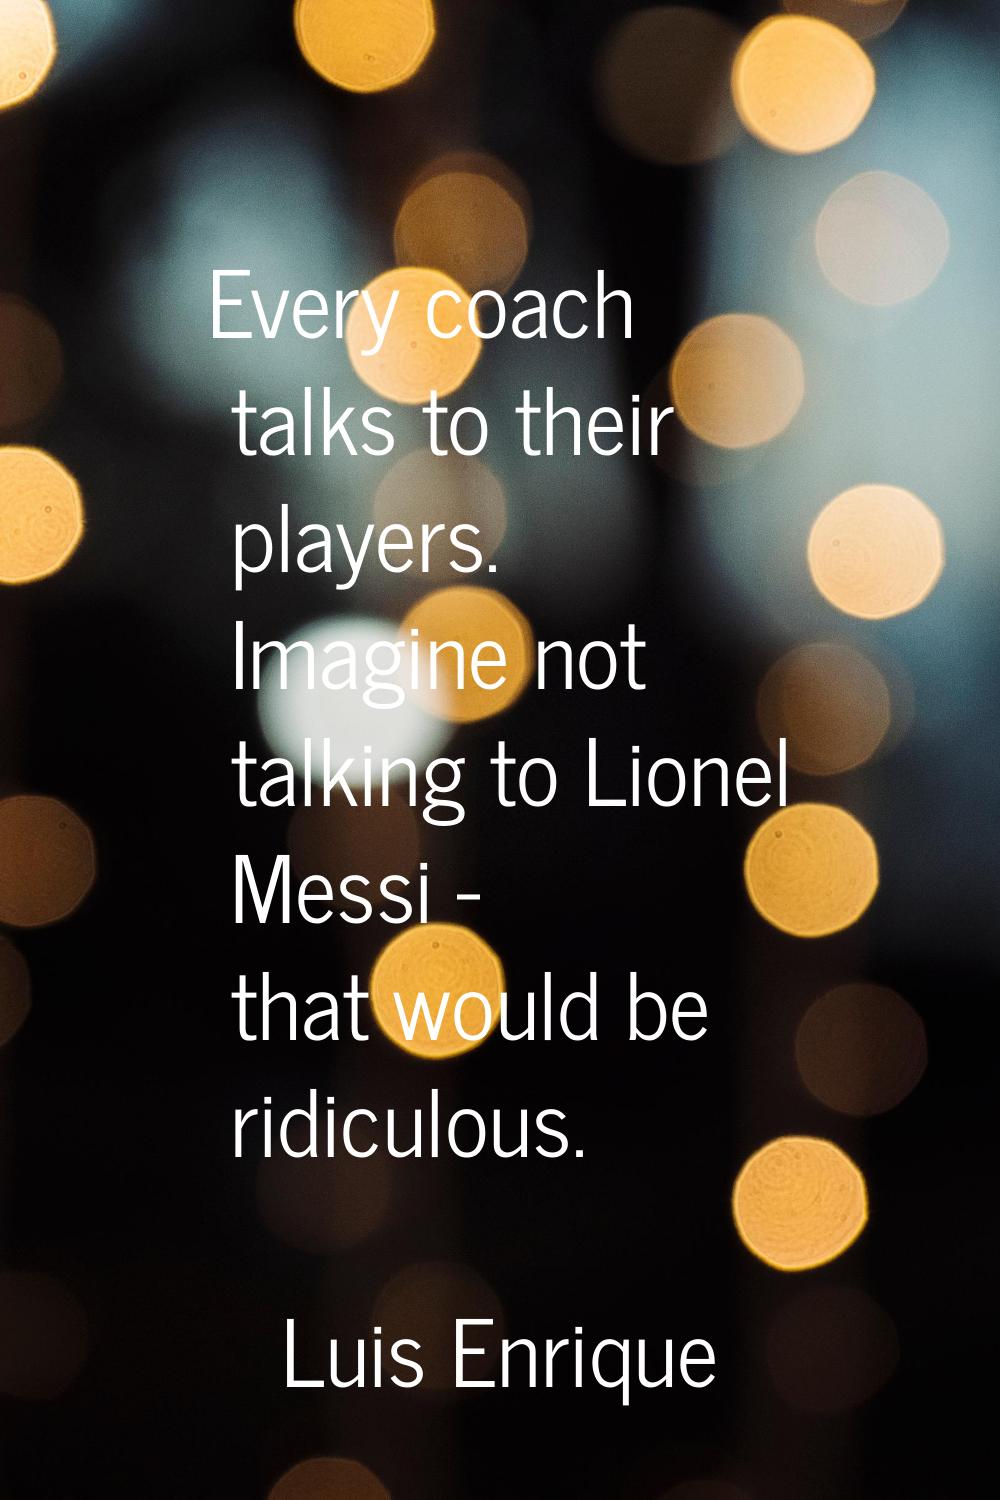 Every coach talks to their players. Imagine not talking to Lionel Messi - that would be ridiculous.